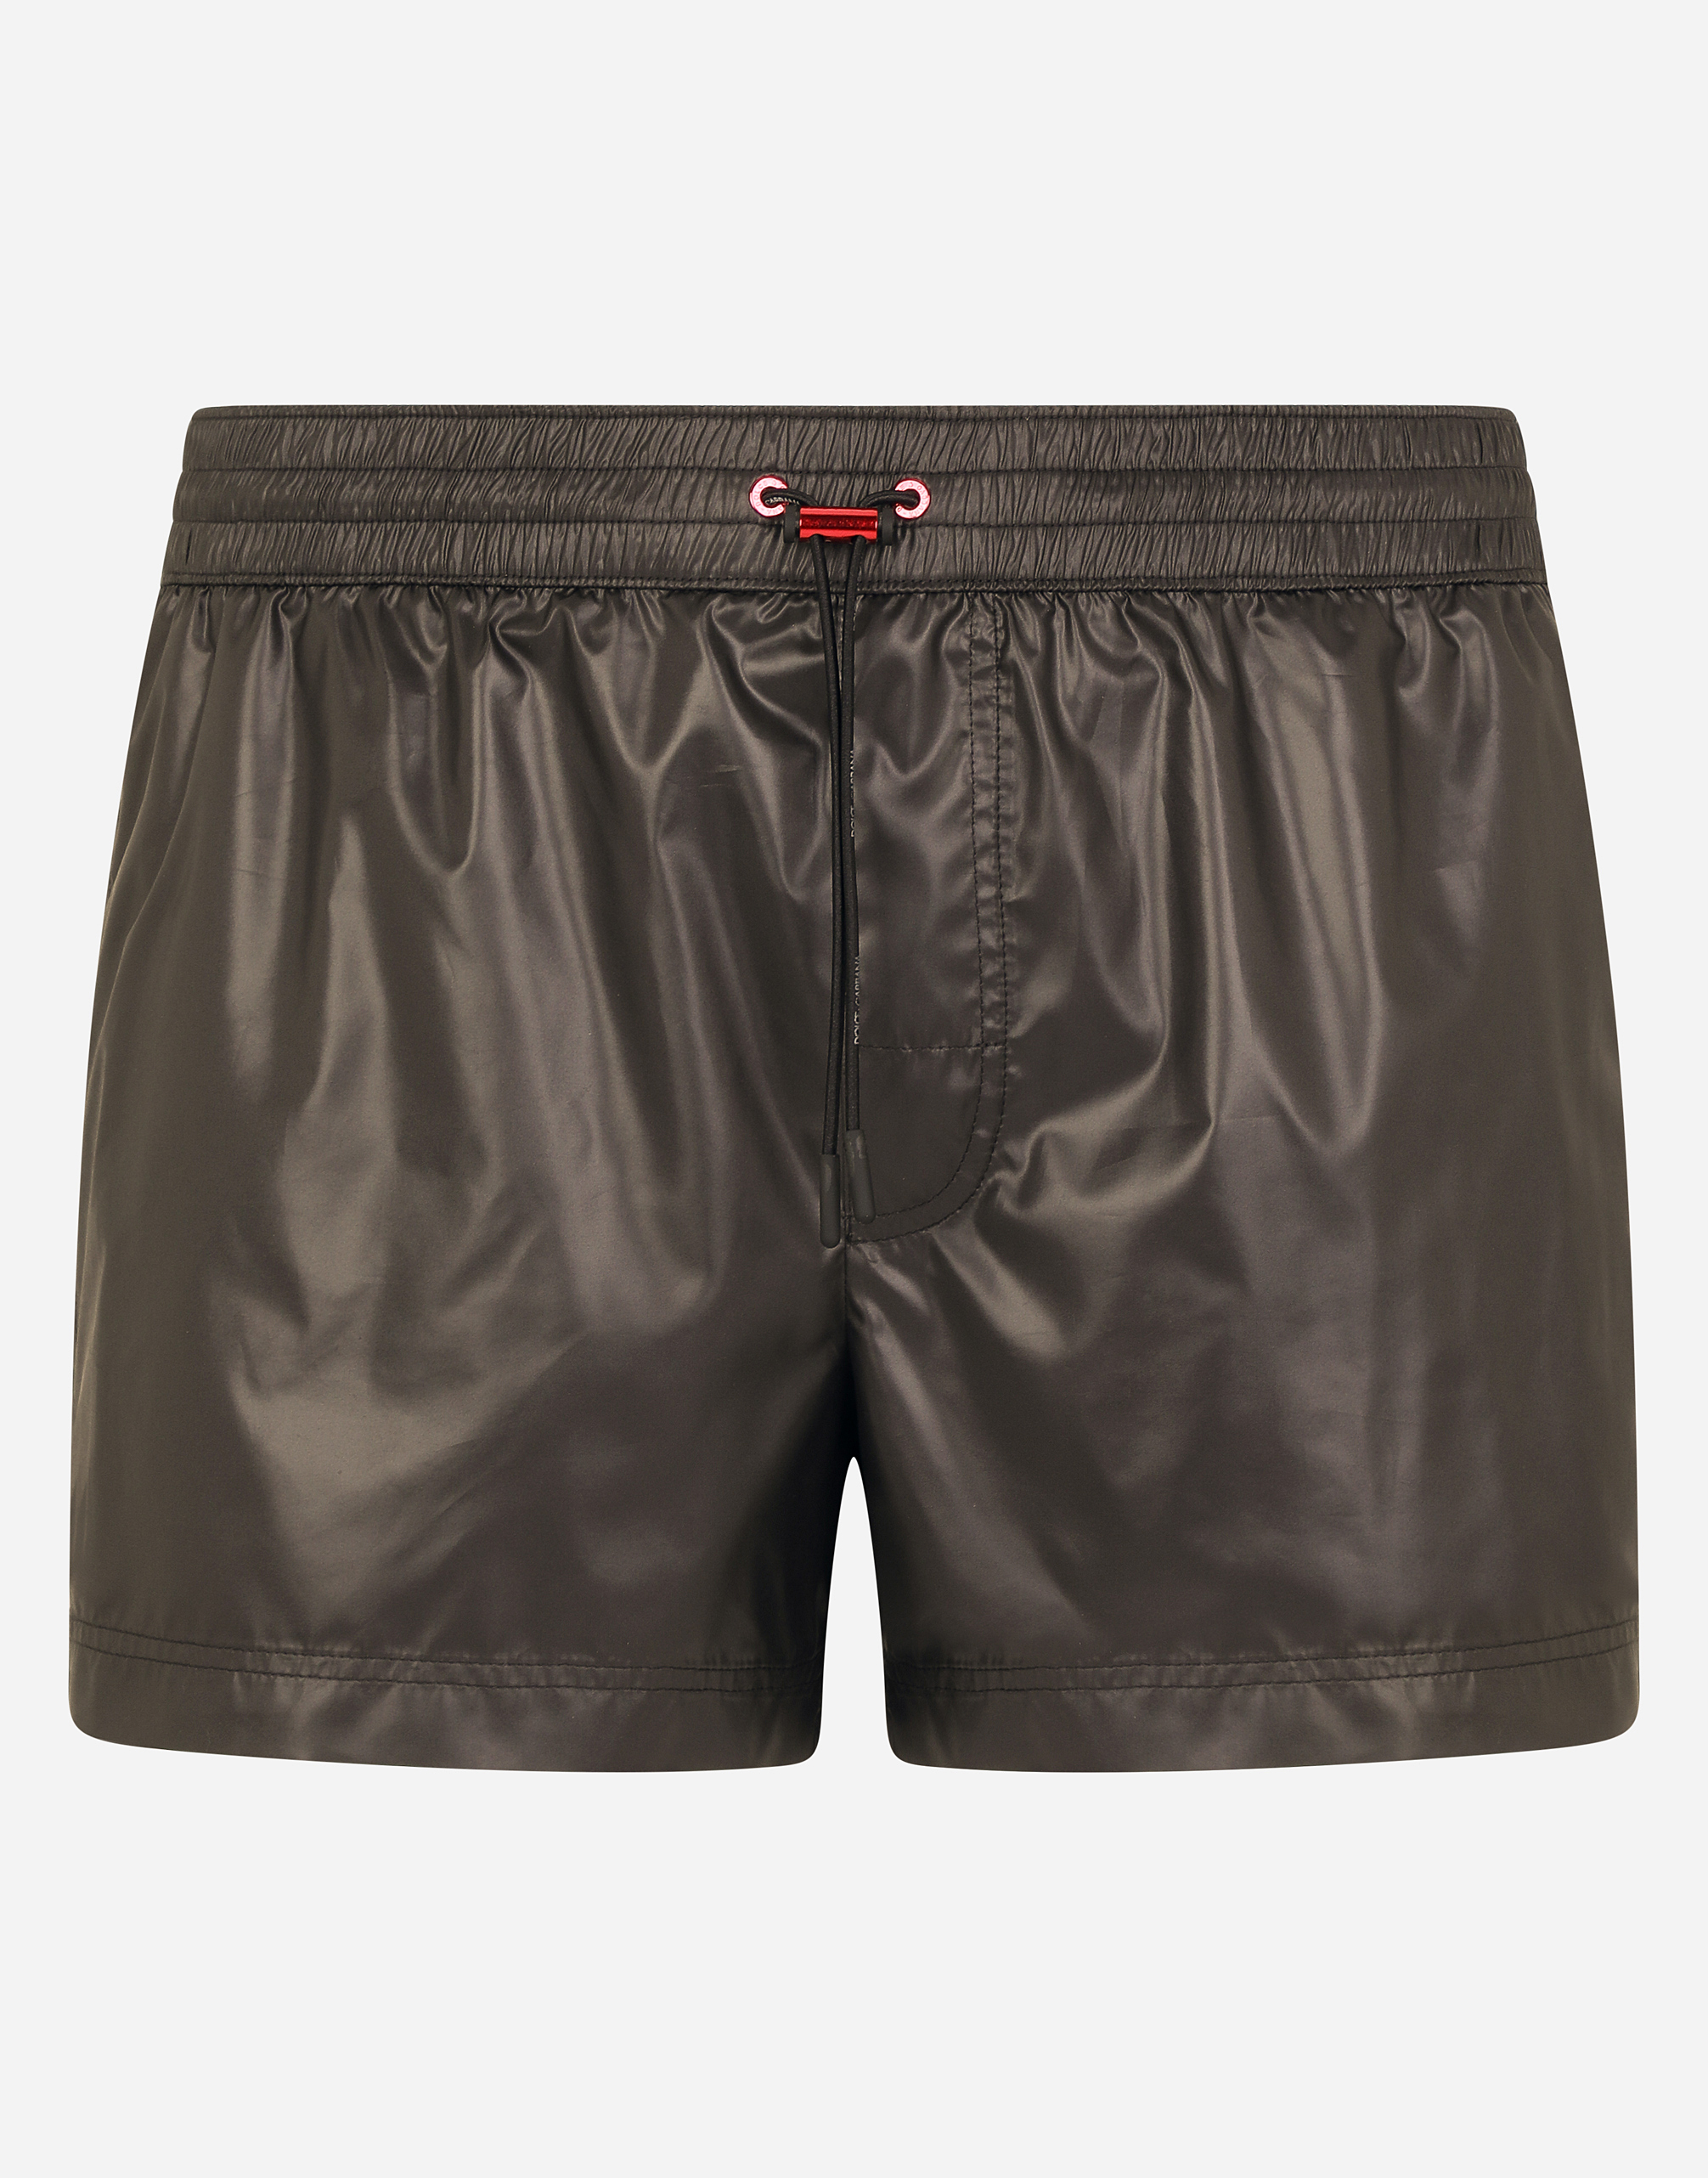 Short swim trunks with side bands in Black